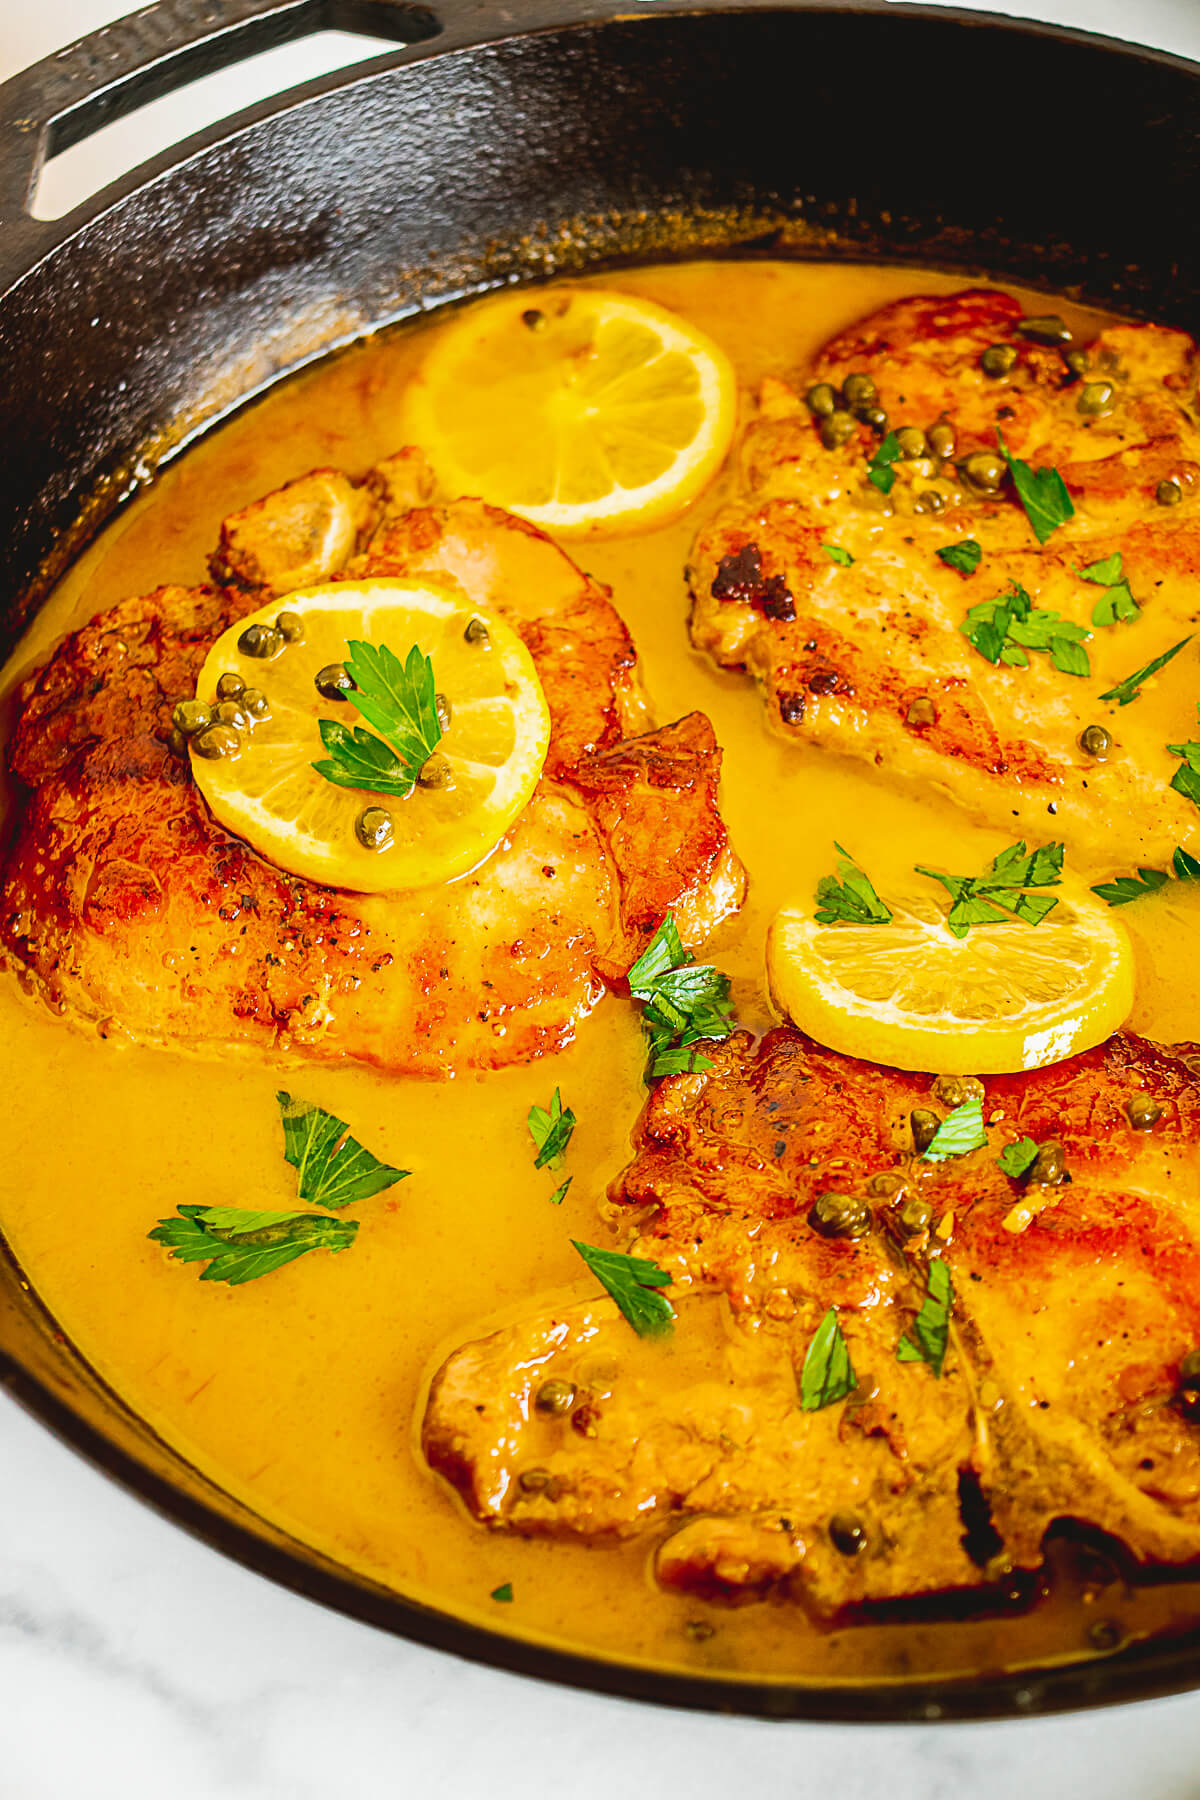 Three golden brown pork chops in a cast iron skillet coated in a luxurious lemony piccata sauce garnished with lemon slices and fresh parsley.